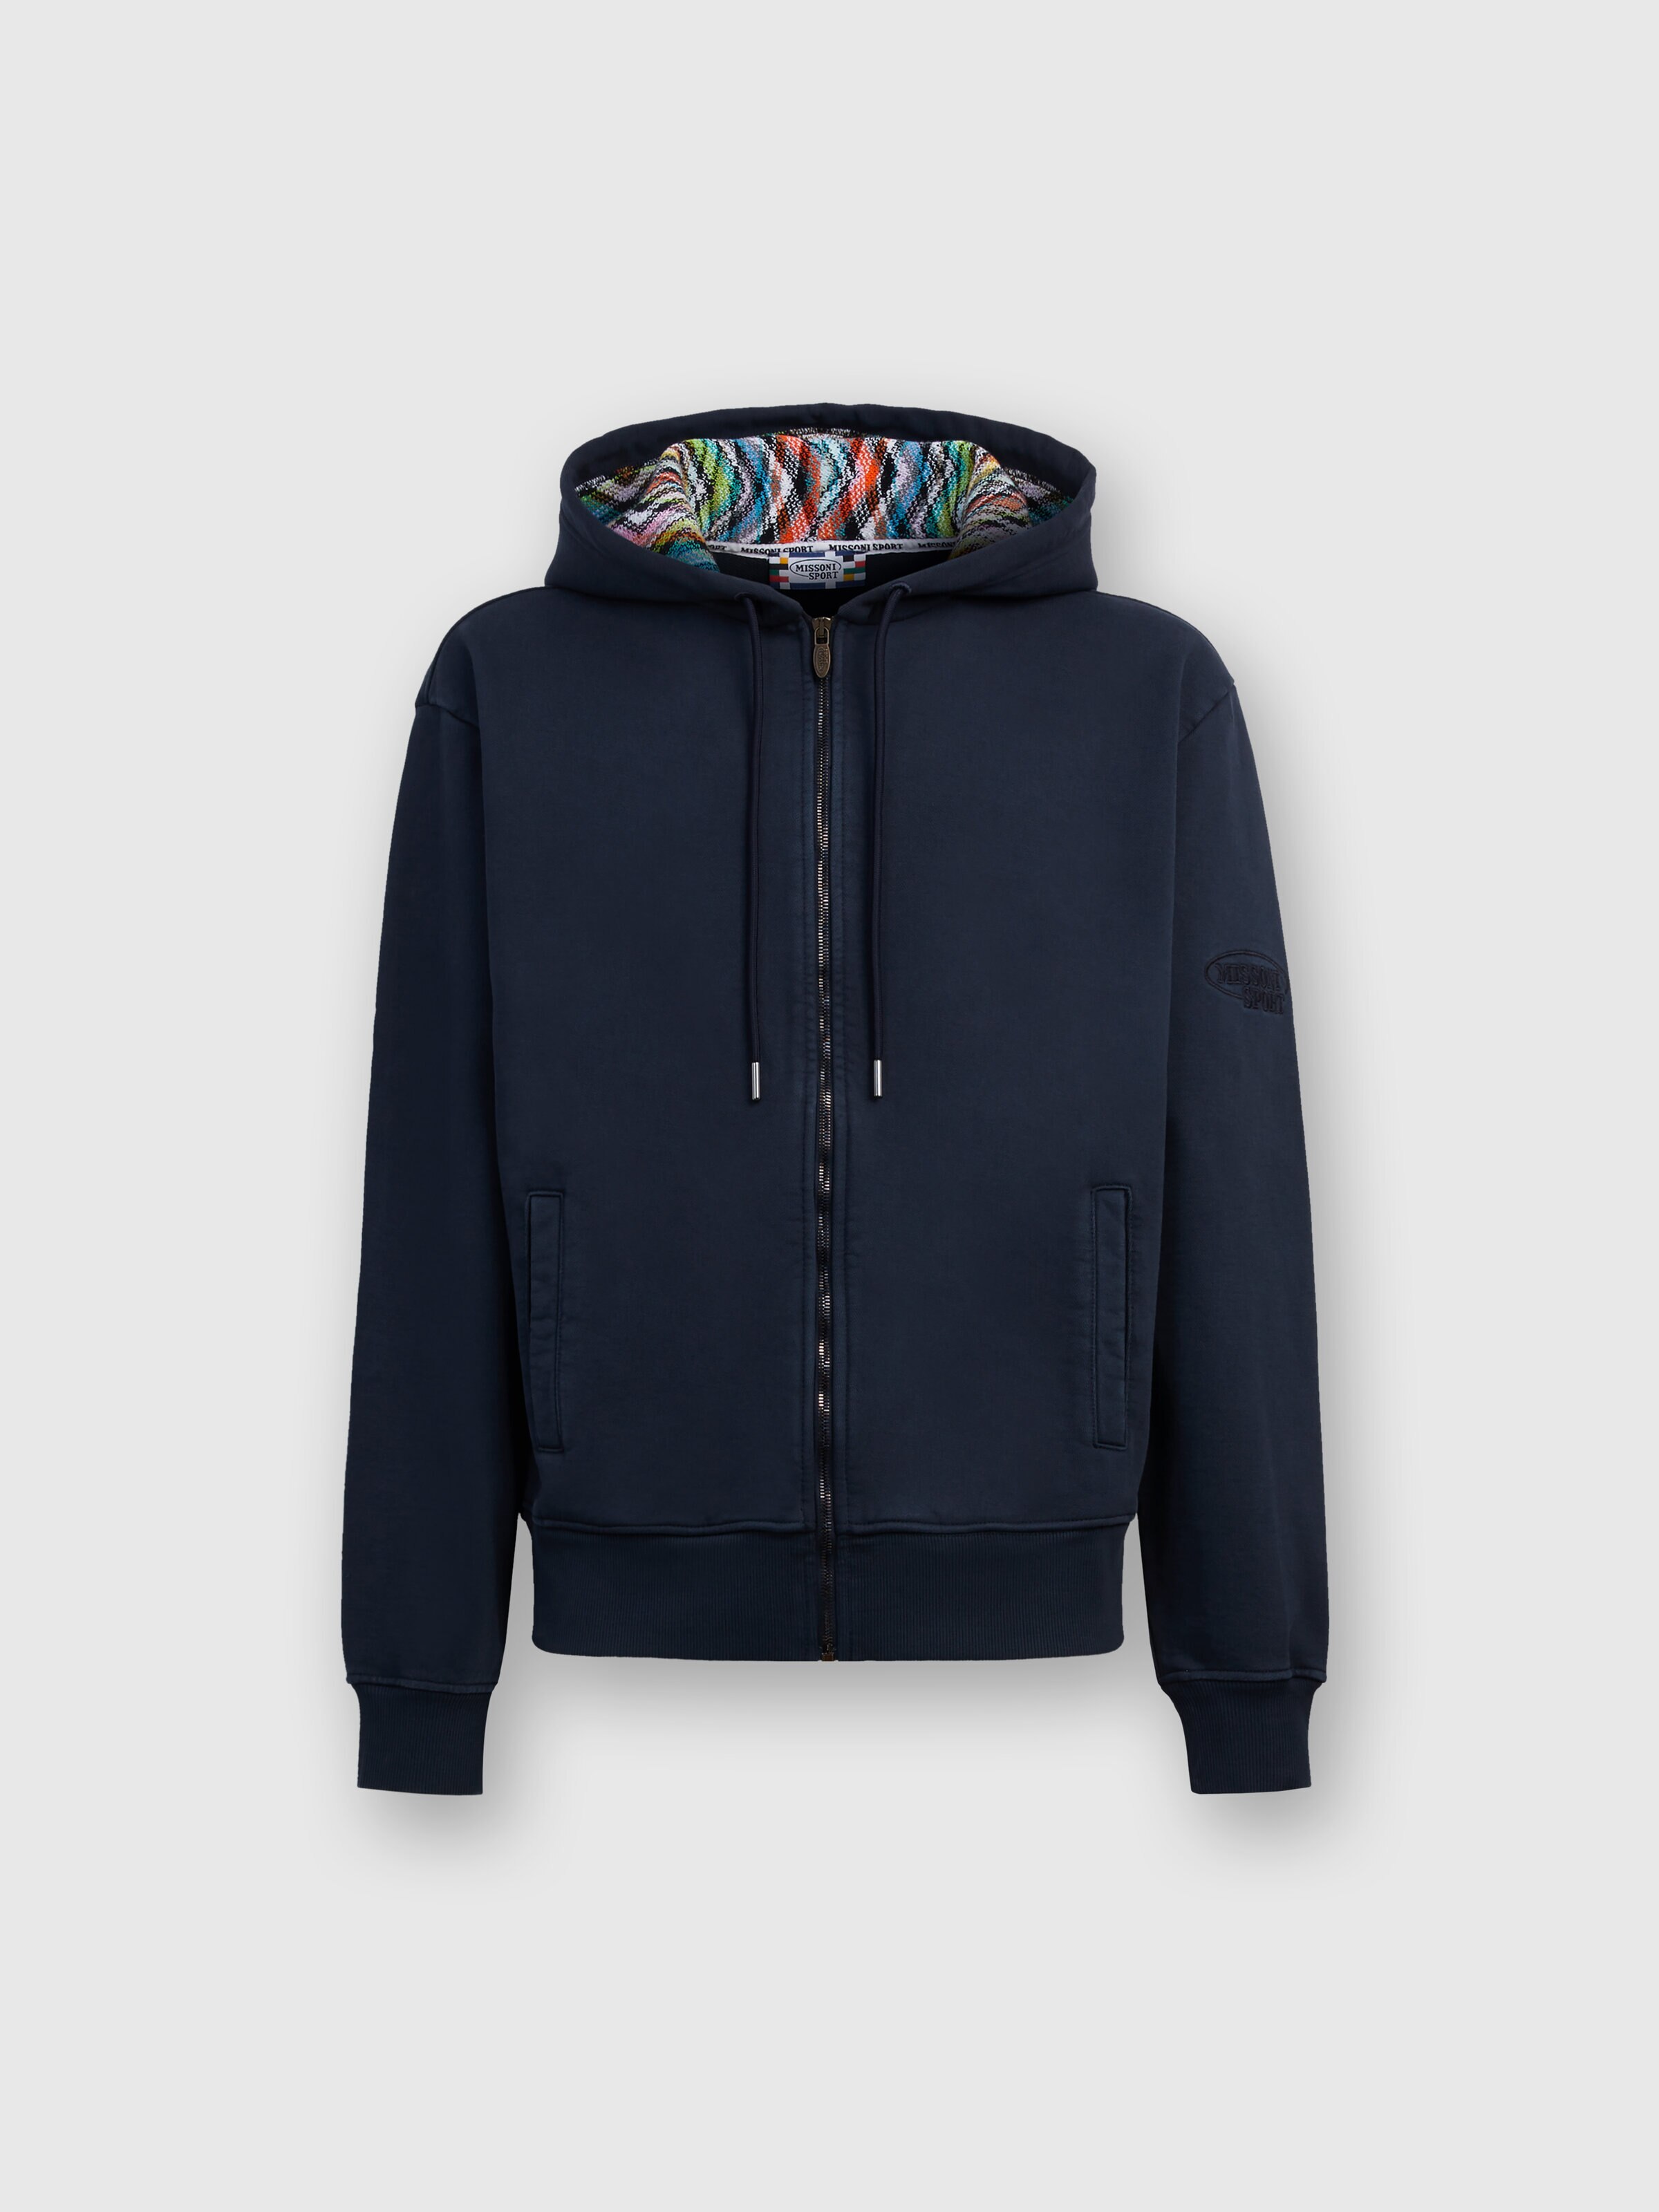 Cardigan in cotton fleece with knitted lined hood, Navy Blue  - 0